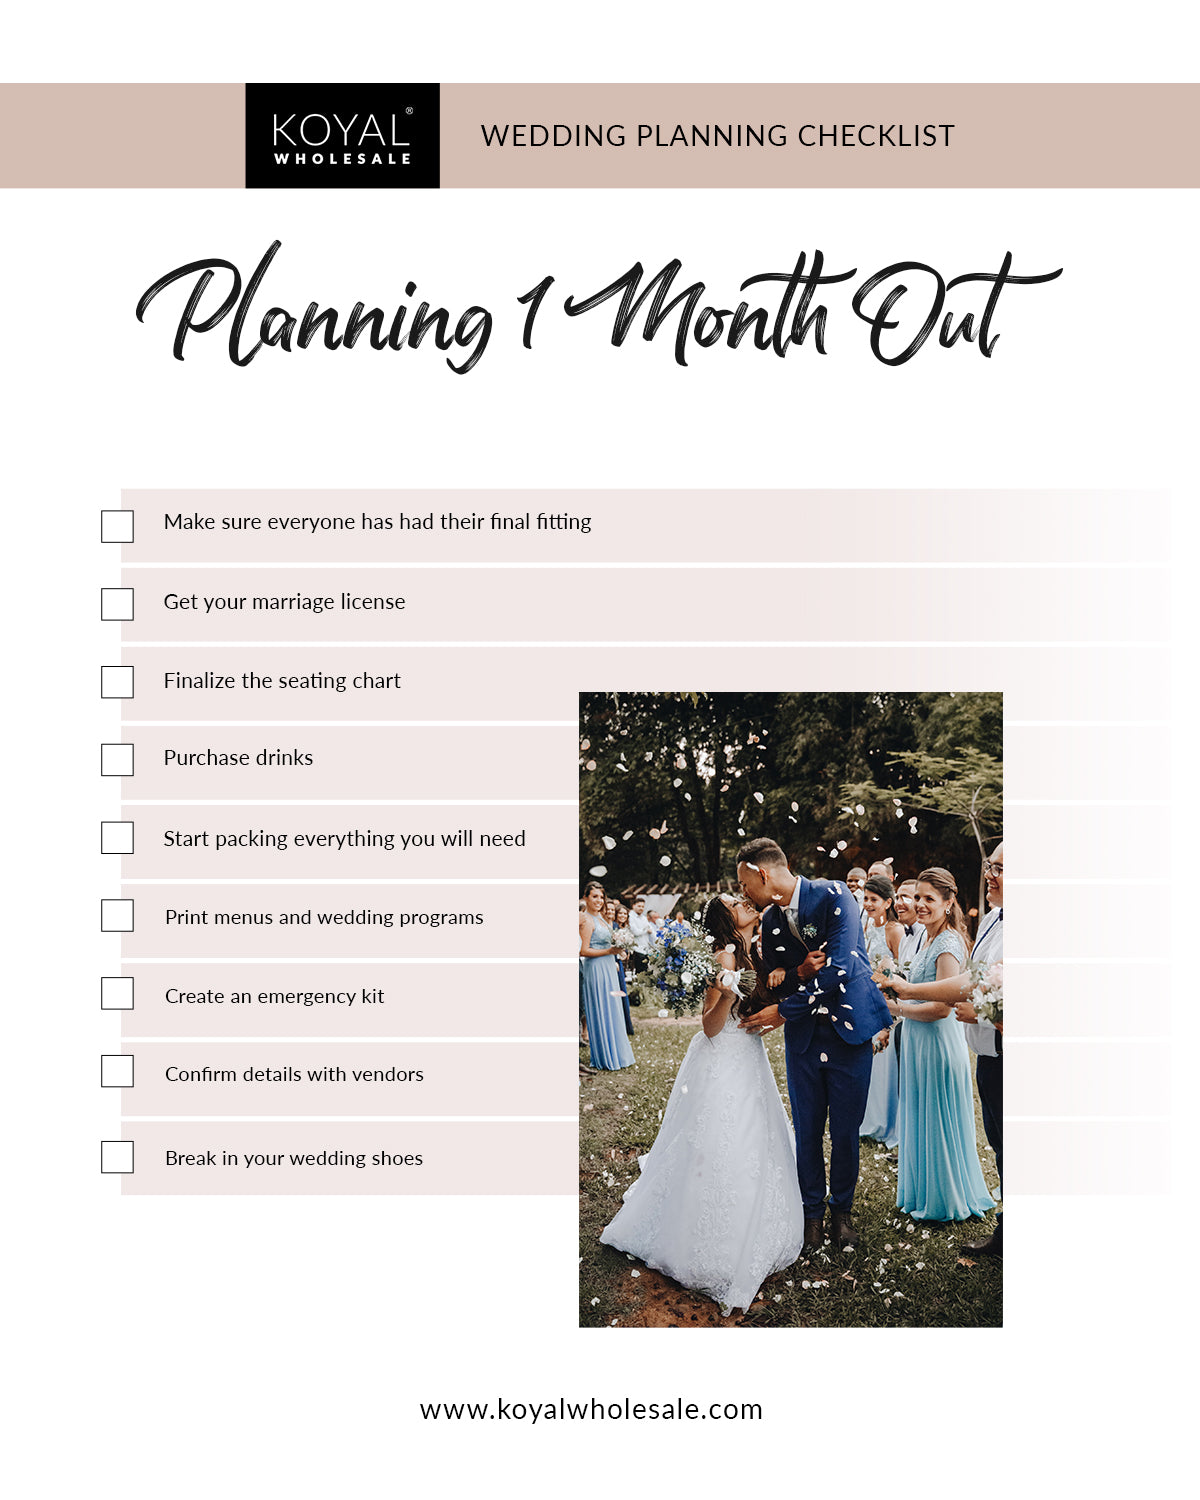 When Do You Need to Finalize Your Wedding Floor Plan?